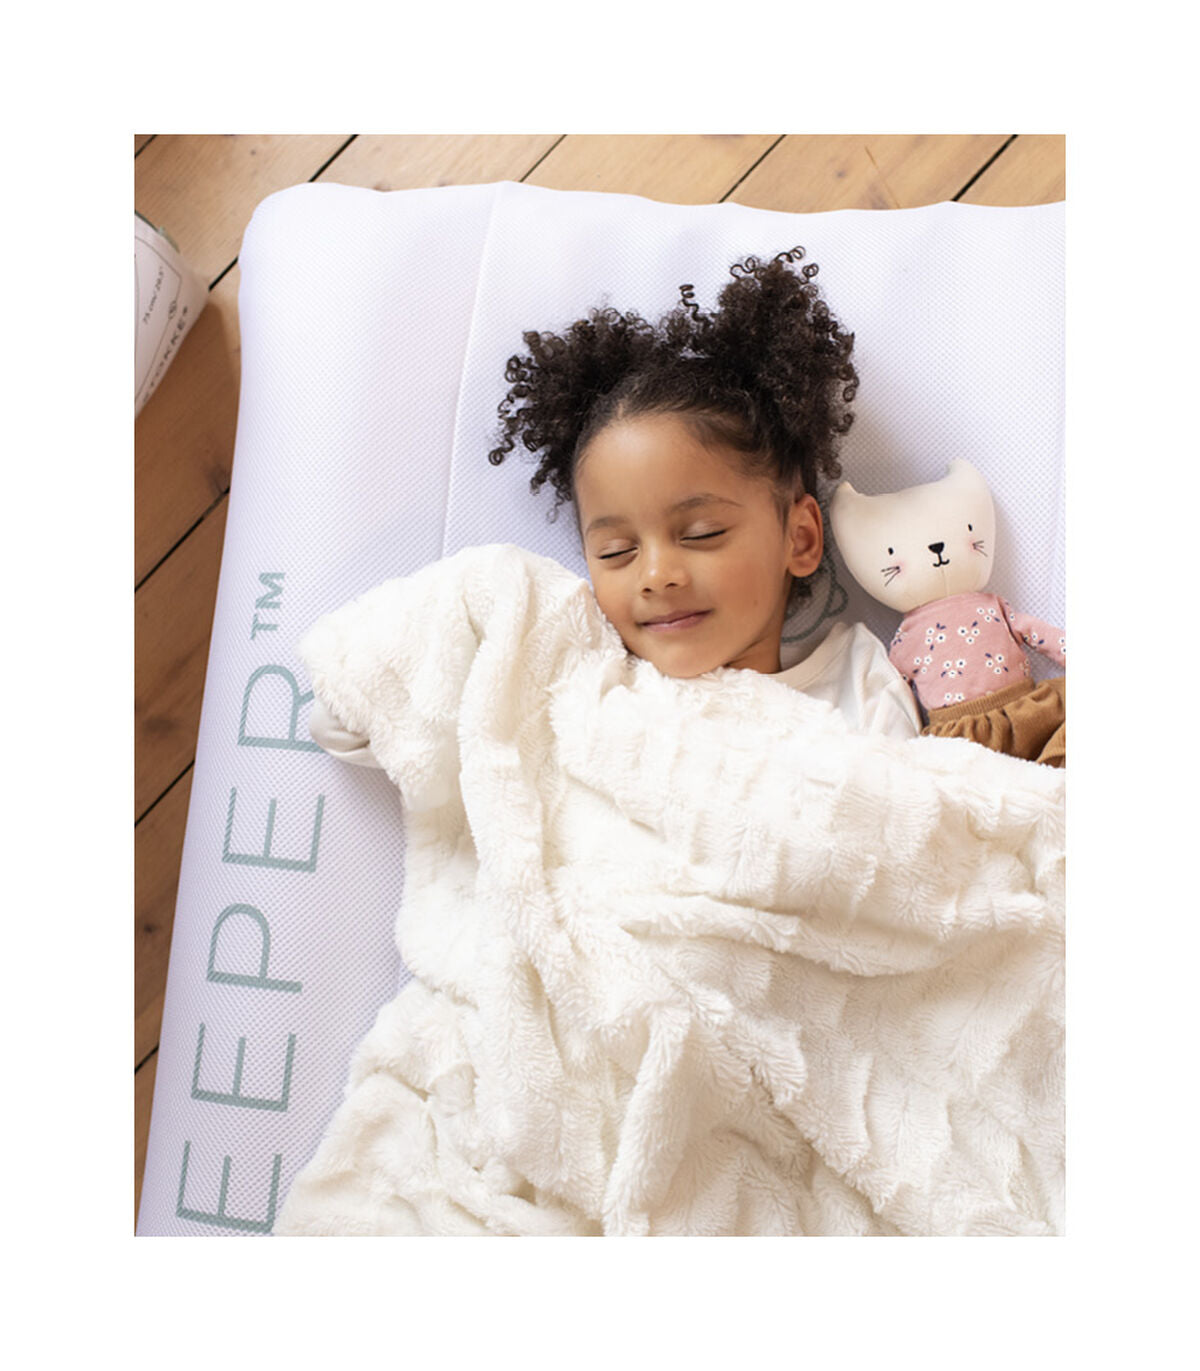 JetKids™ by Stokke® CloudSleeper™ Inflatable Kids' Bed